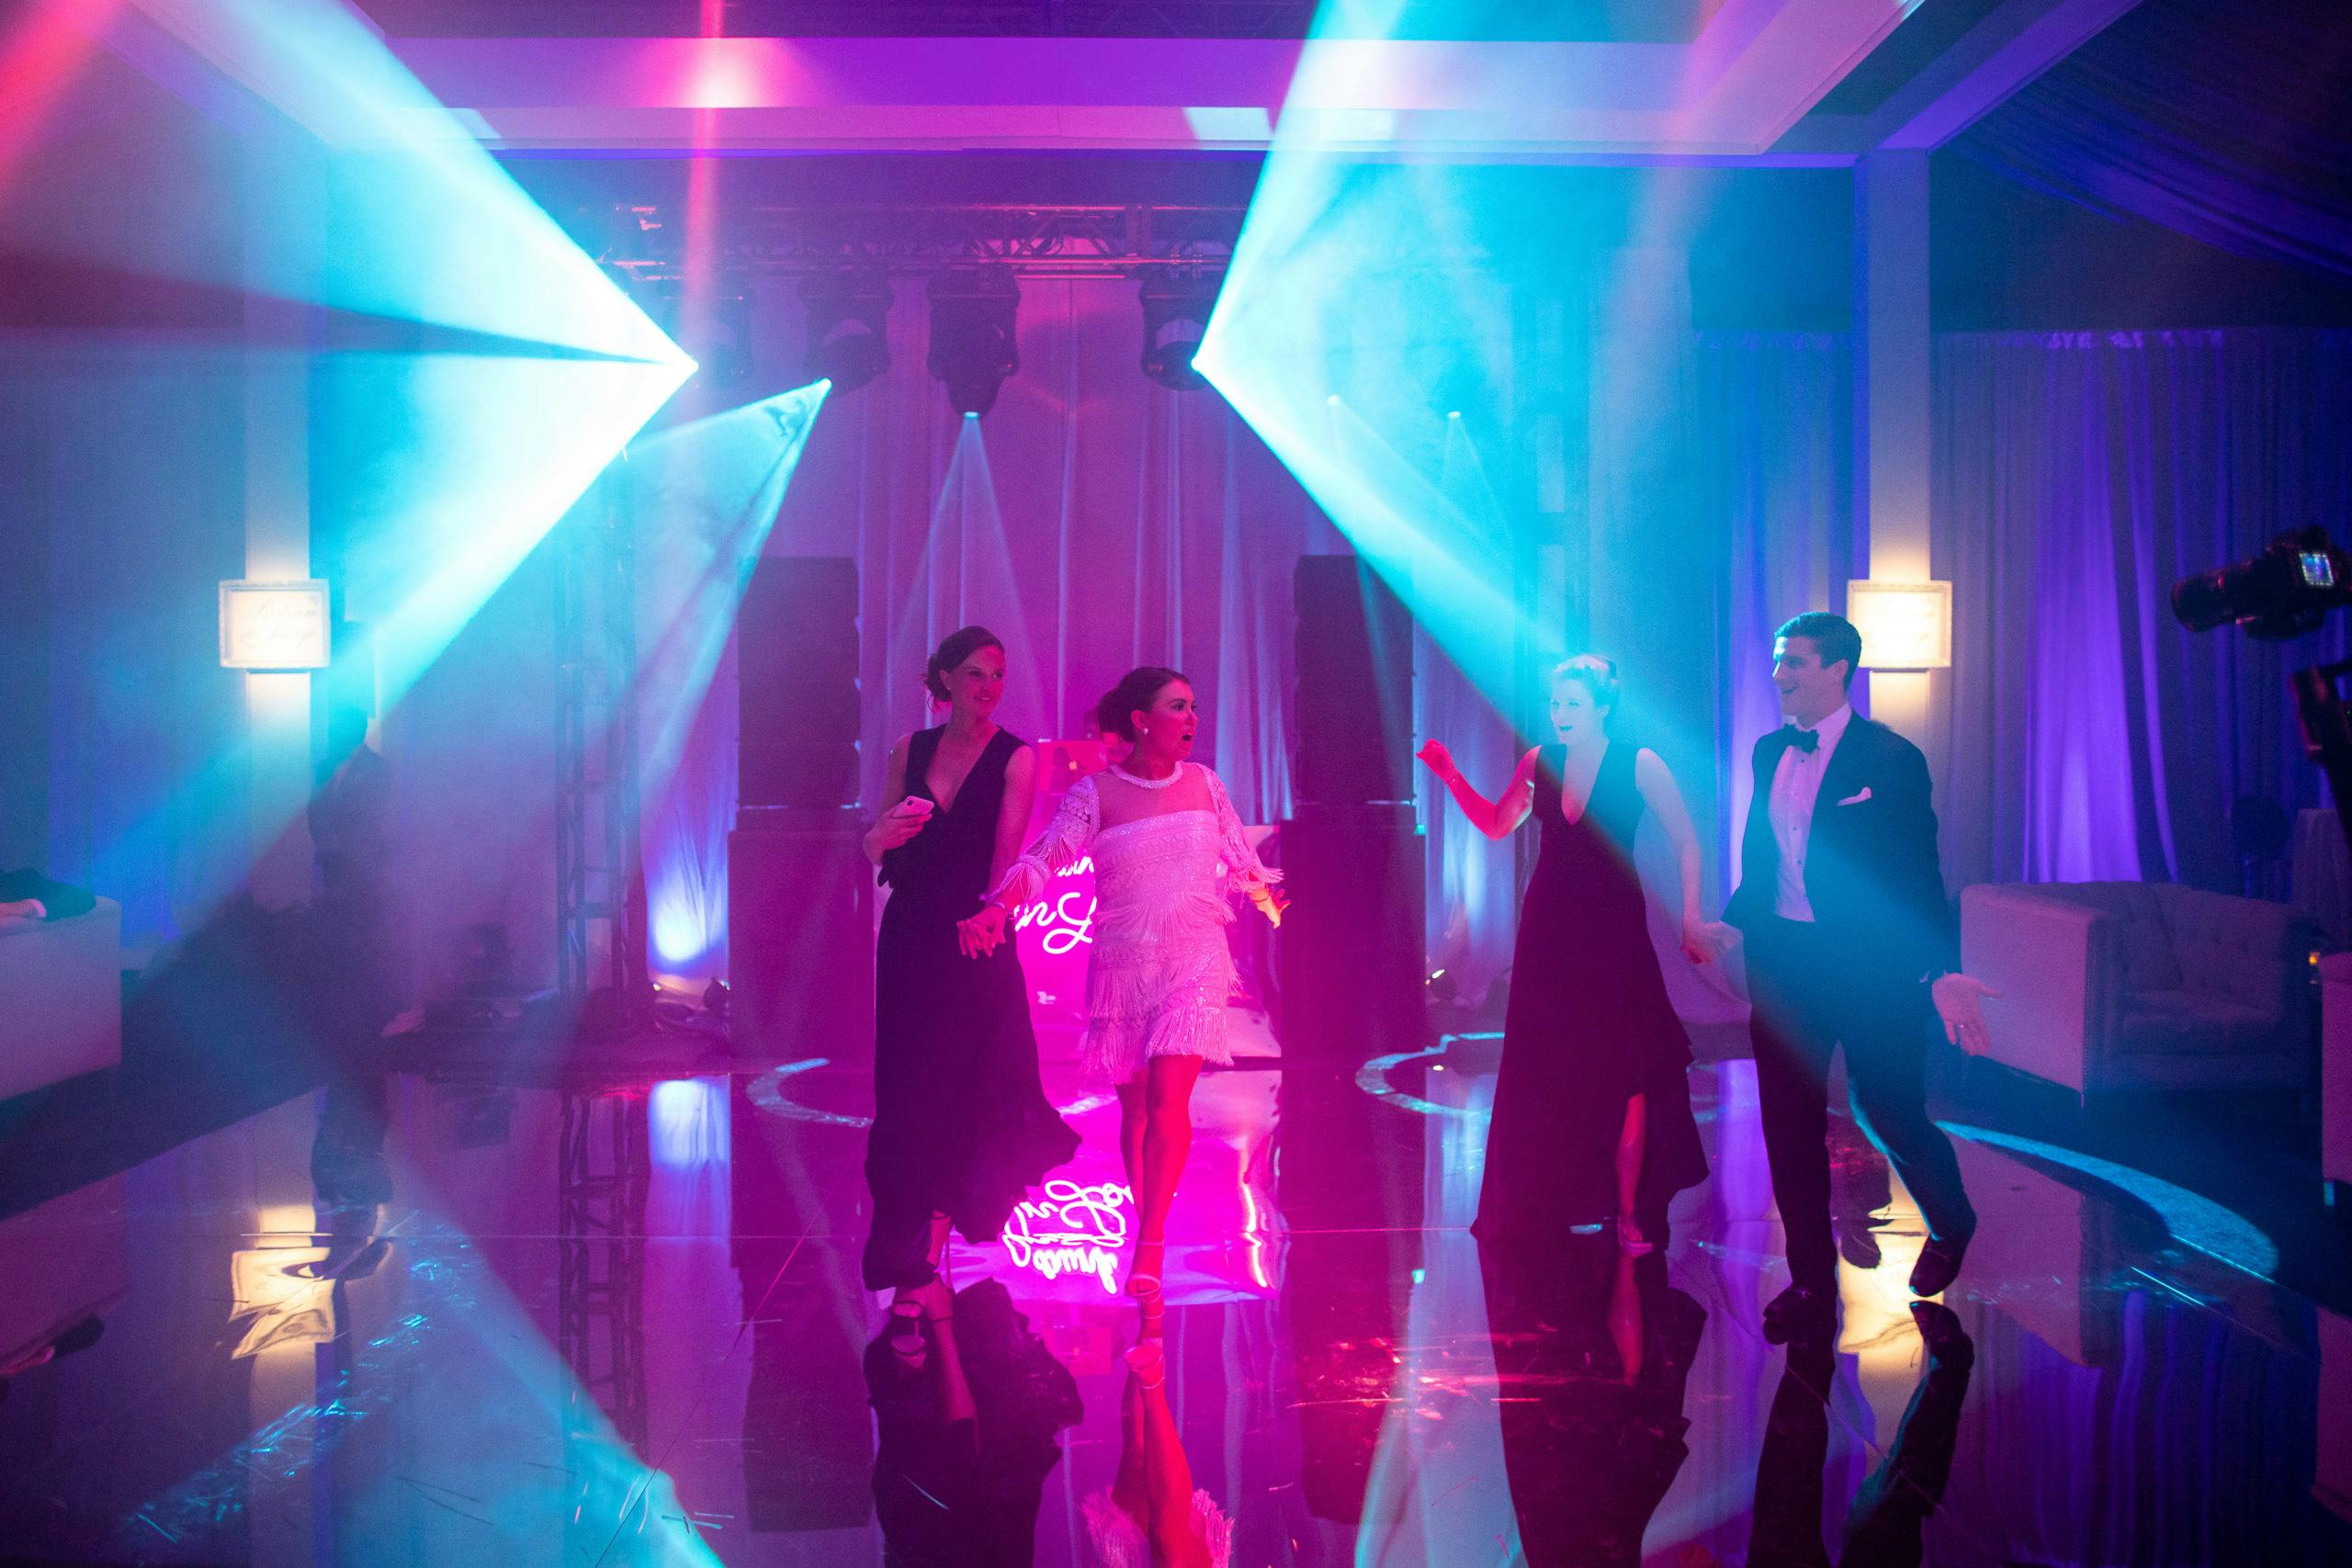 dramatic blue and purple neon lighting at wedding after-party | PartySlate